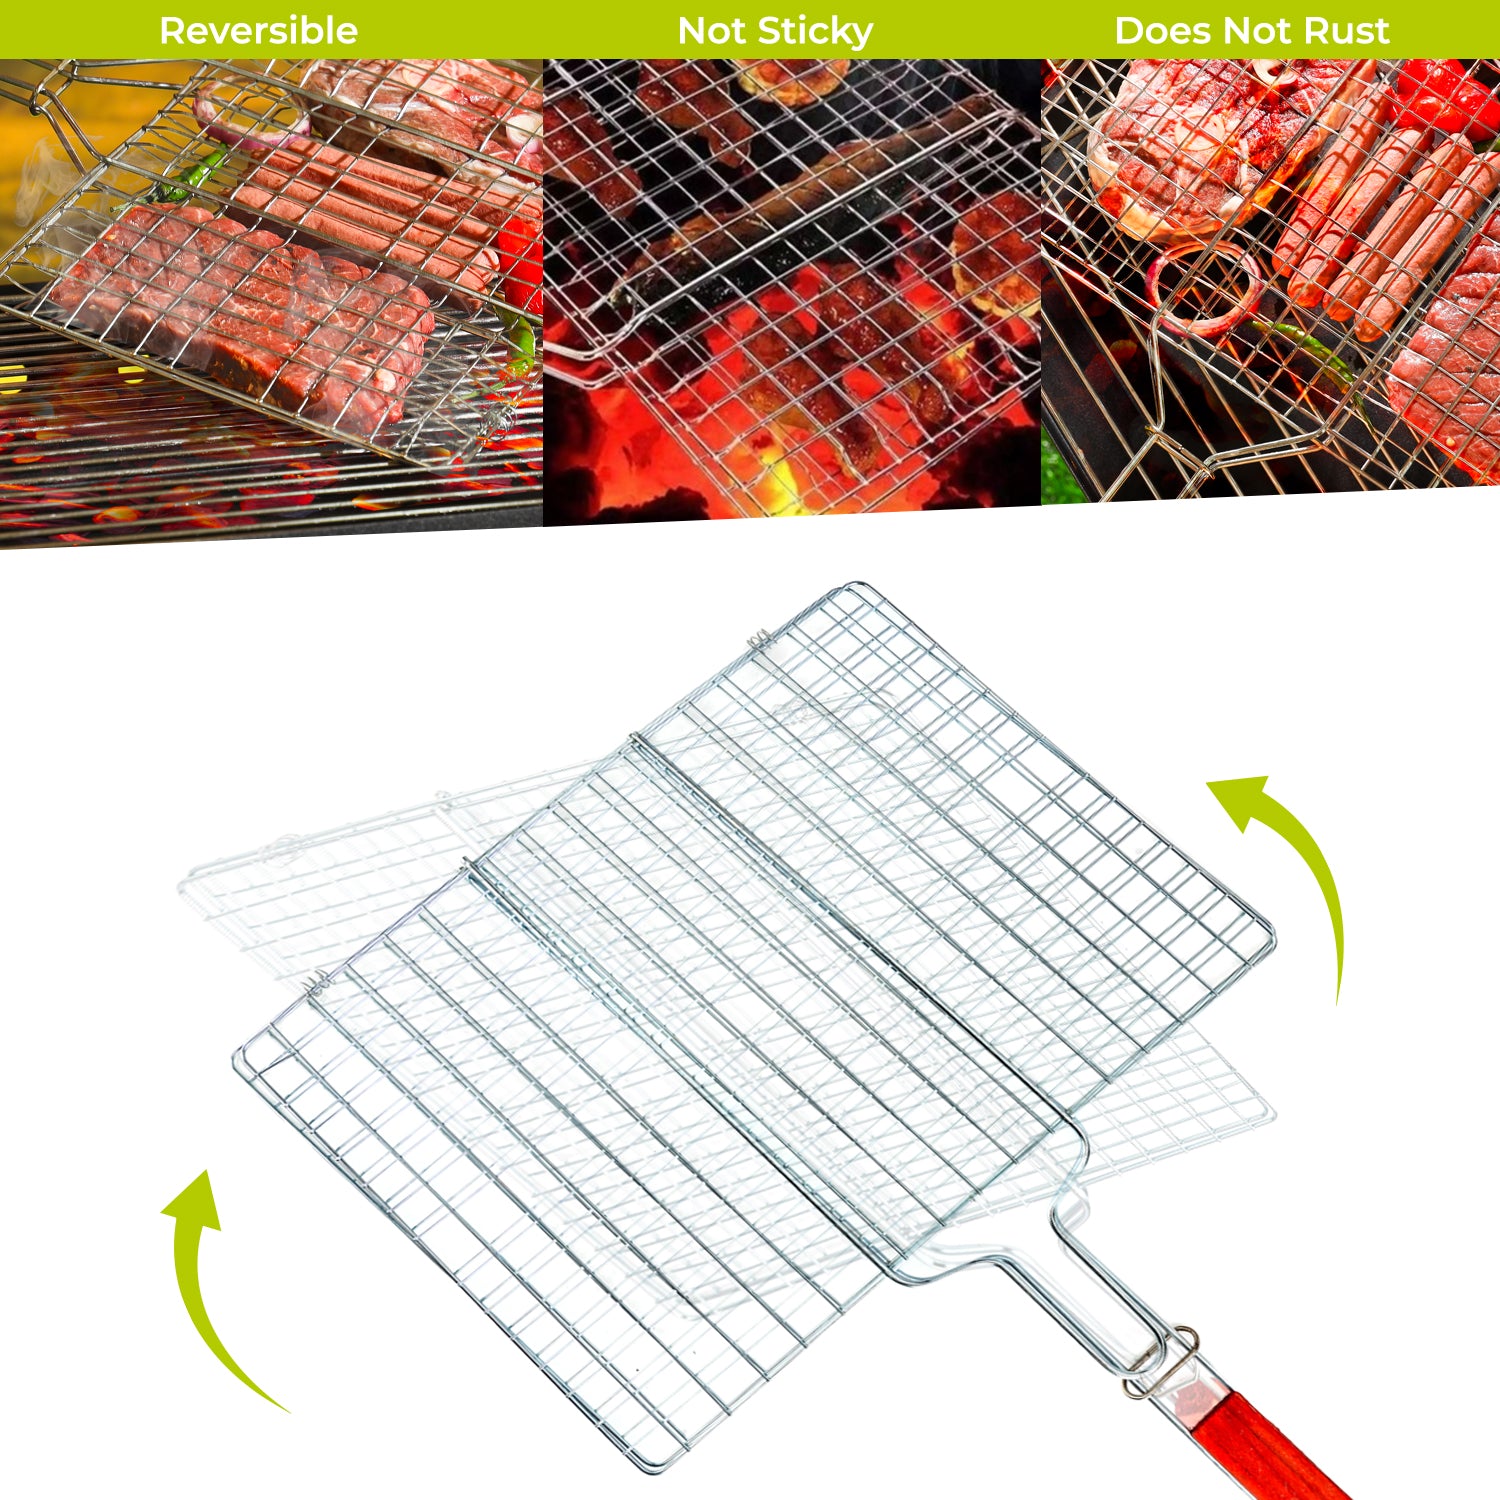 30cm BBQ Grilling Basket With Wooden Handle